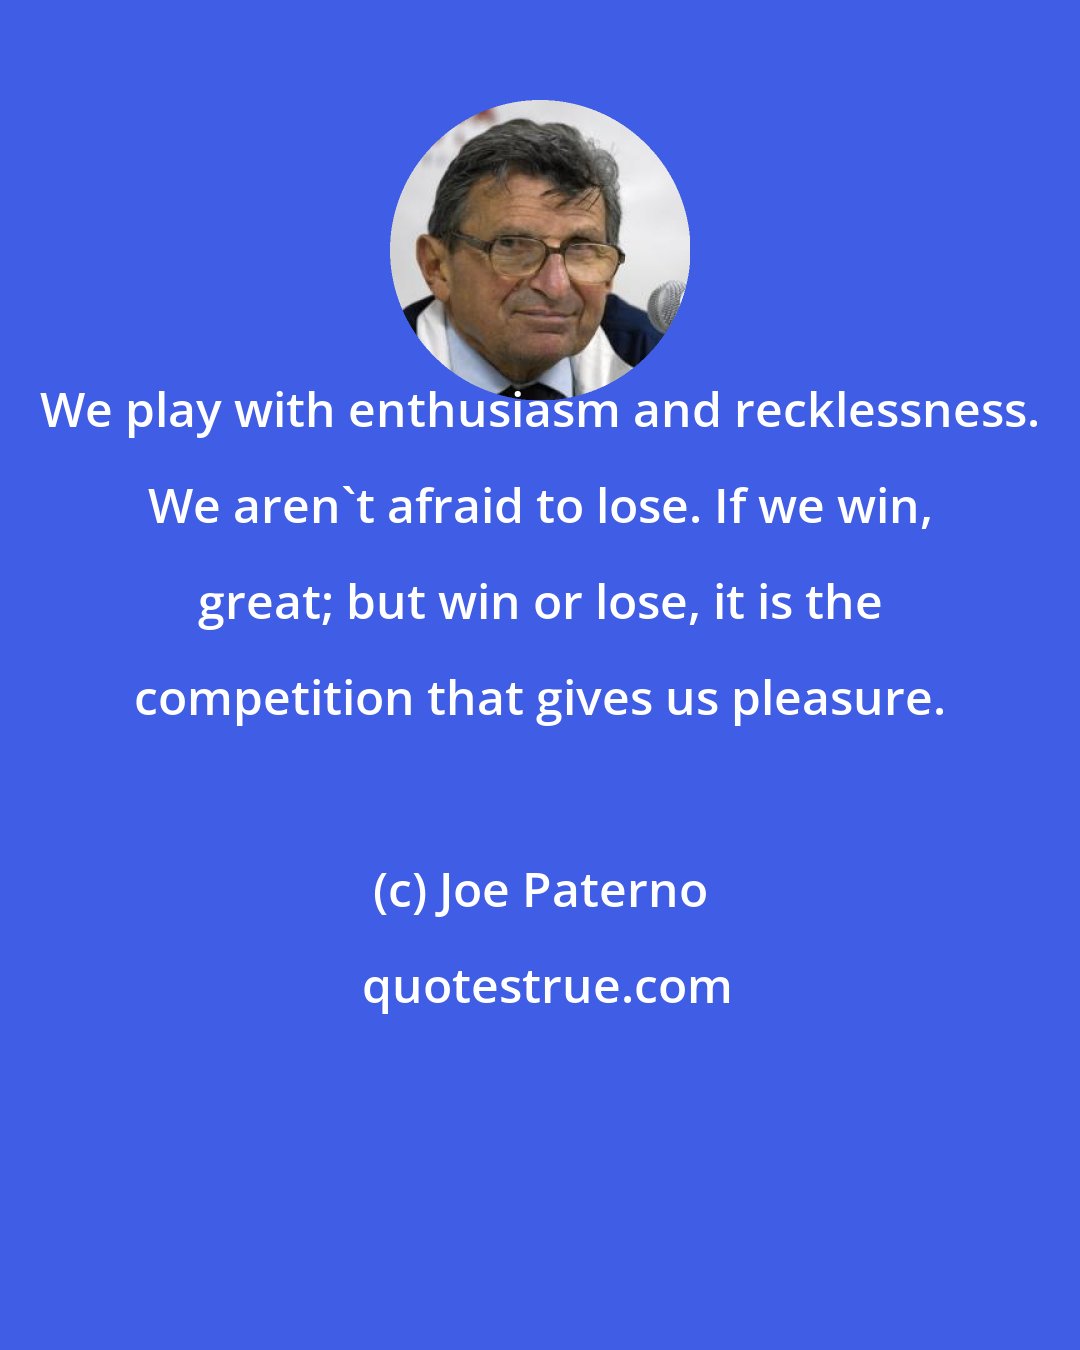 Joe Paterno: We play with enthusiasm and recklessness. We aren't afraid to lose. If we win, great; but win or lose, it is the competition that gives us pleasure.